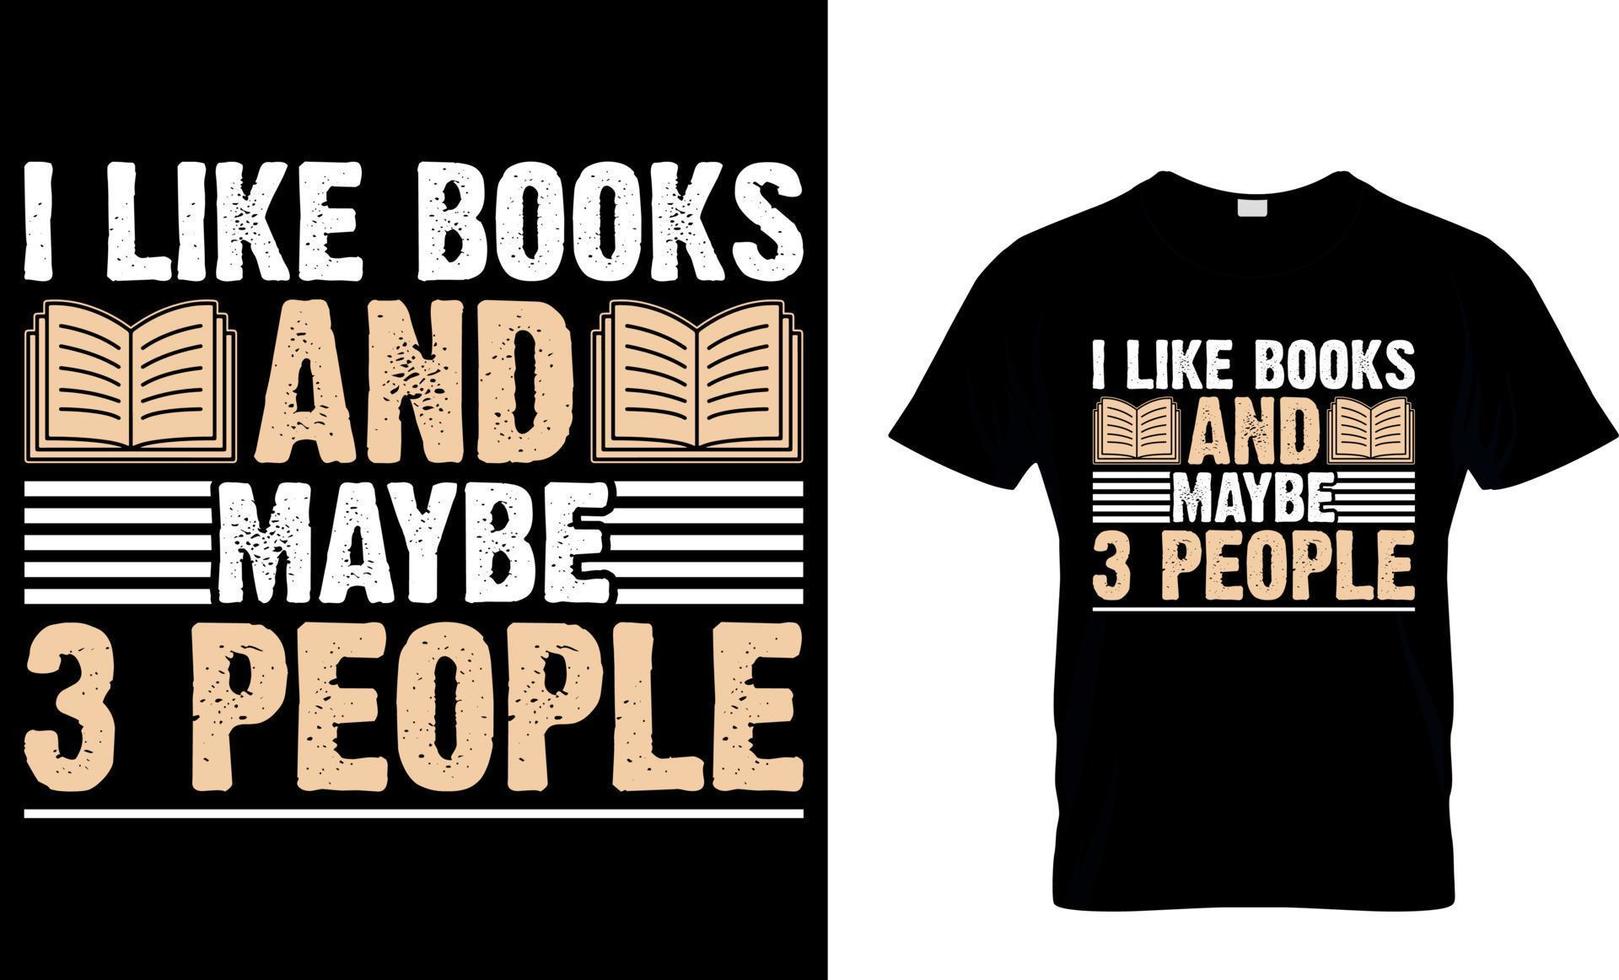 i like books and maybe 3 people. book t shirt design.book design. read design. reading t shirt design. cat design. dog design. coffee design. vector